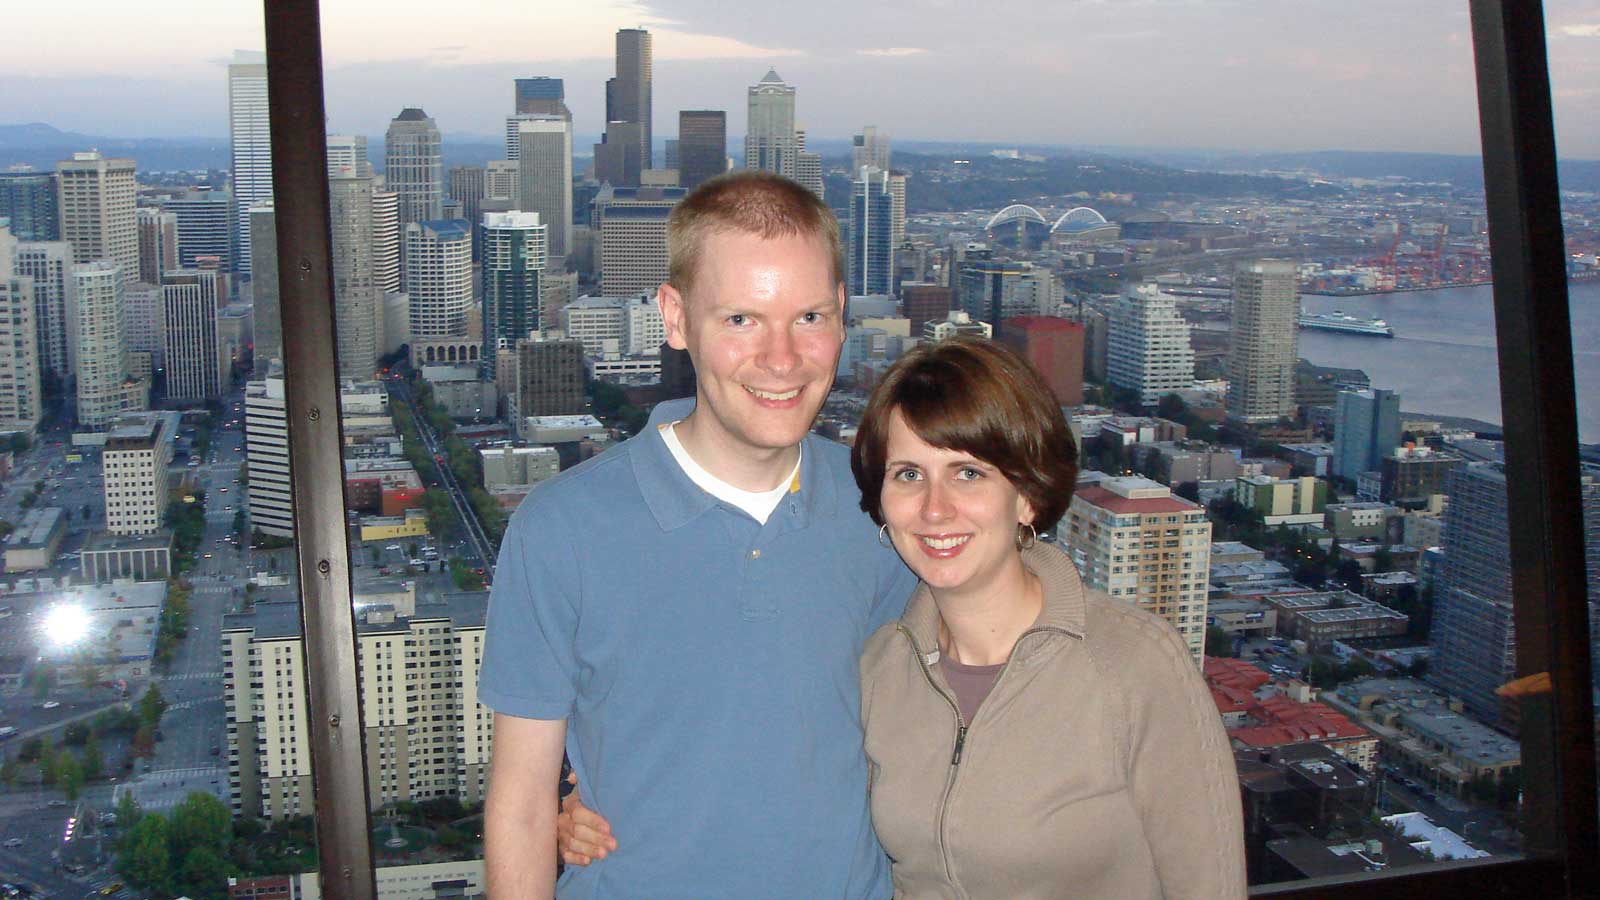 William and Rebecca at the top of the Space Needle